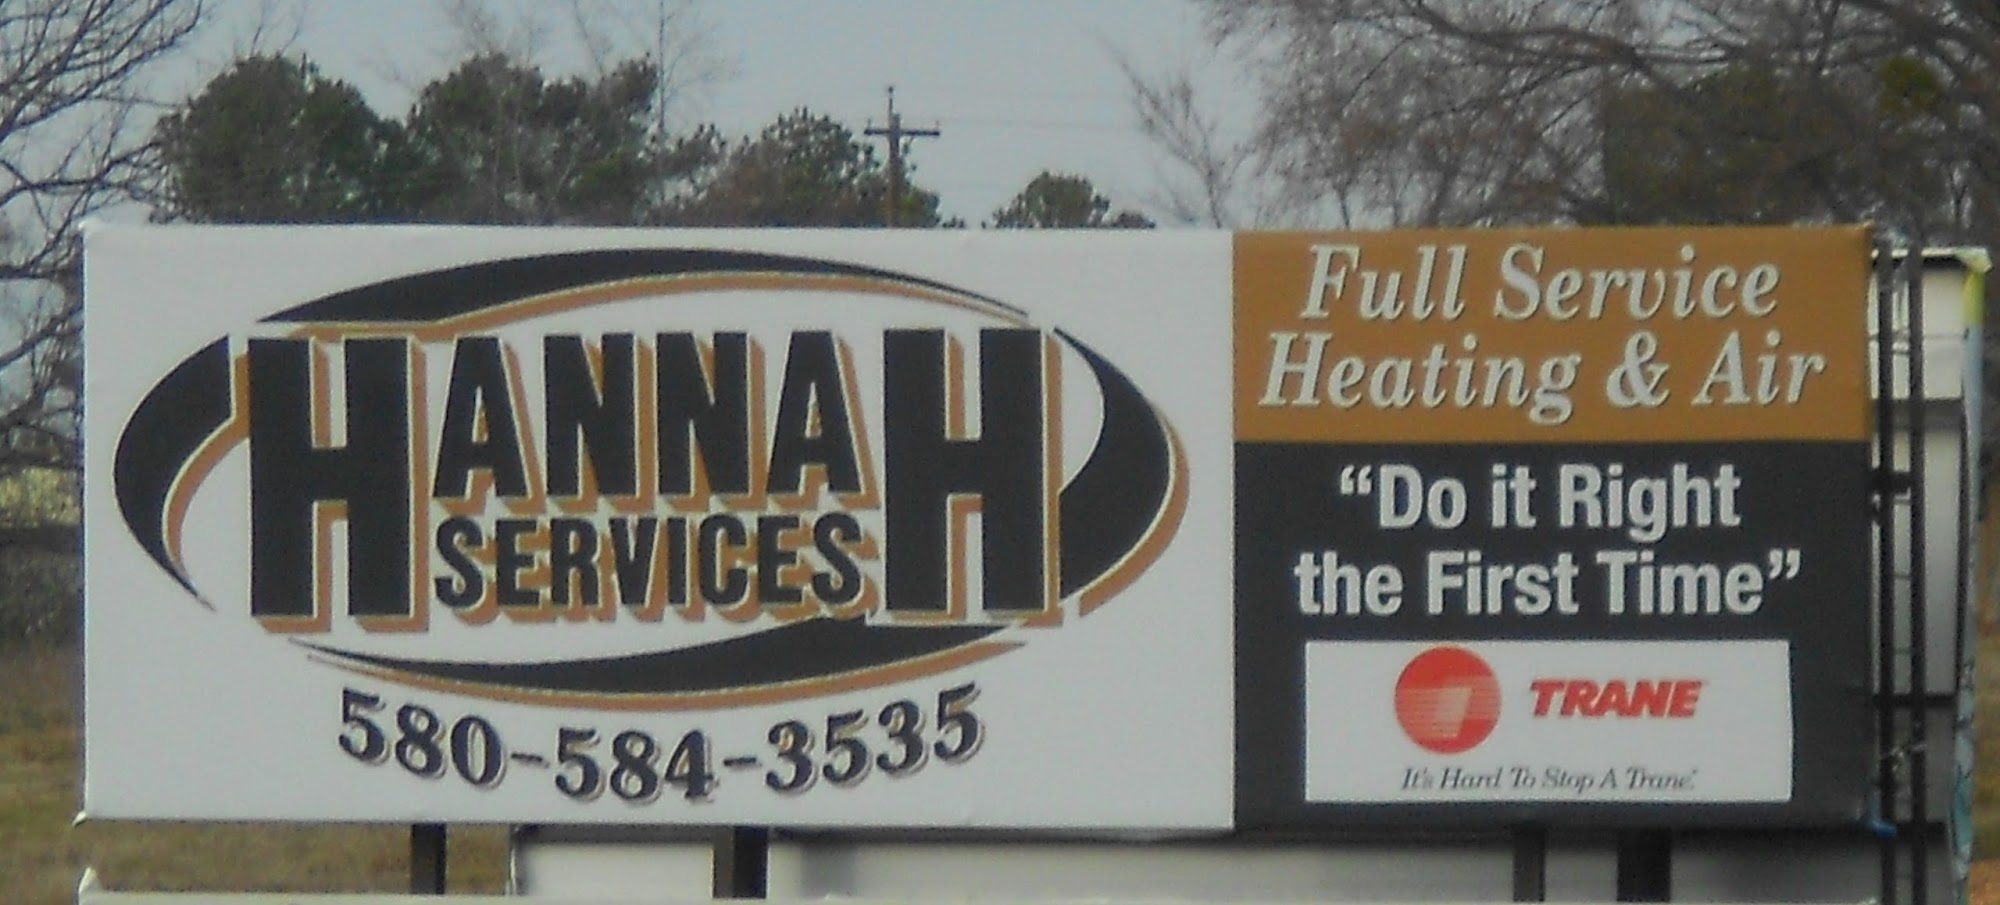 Hannah Services Heating and Cooling